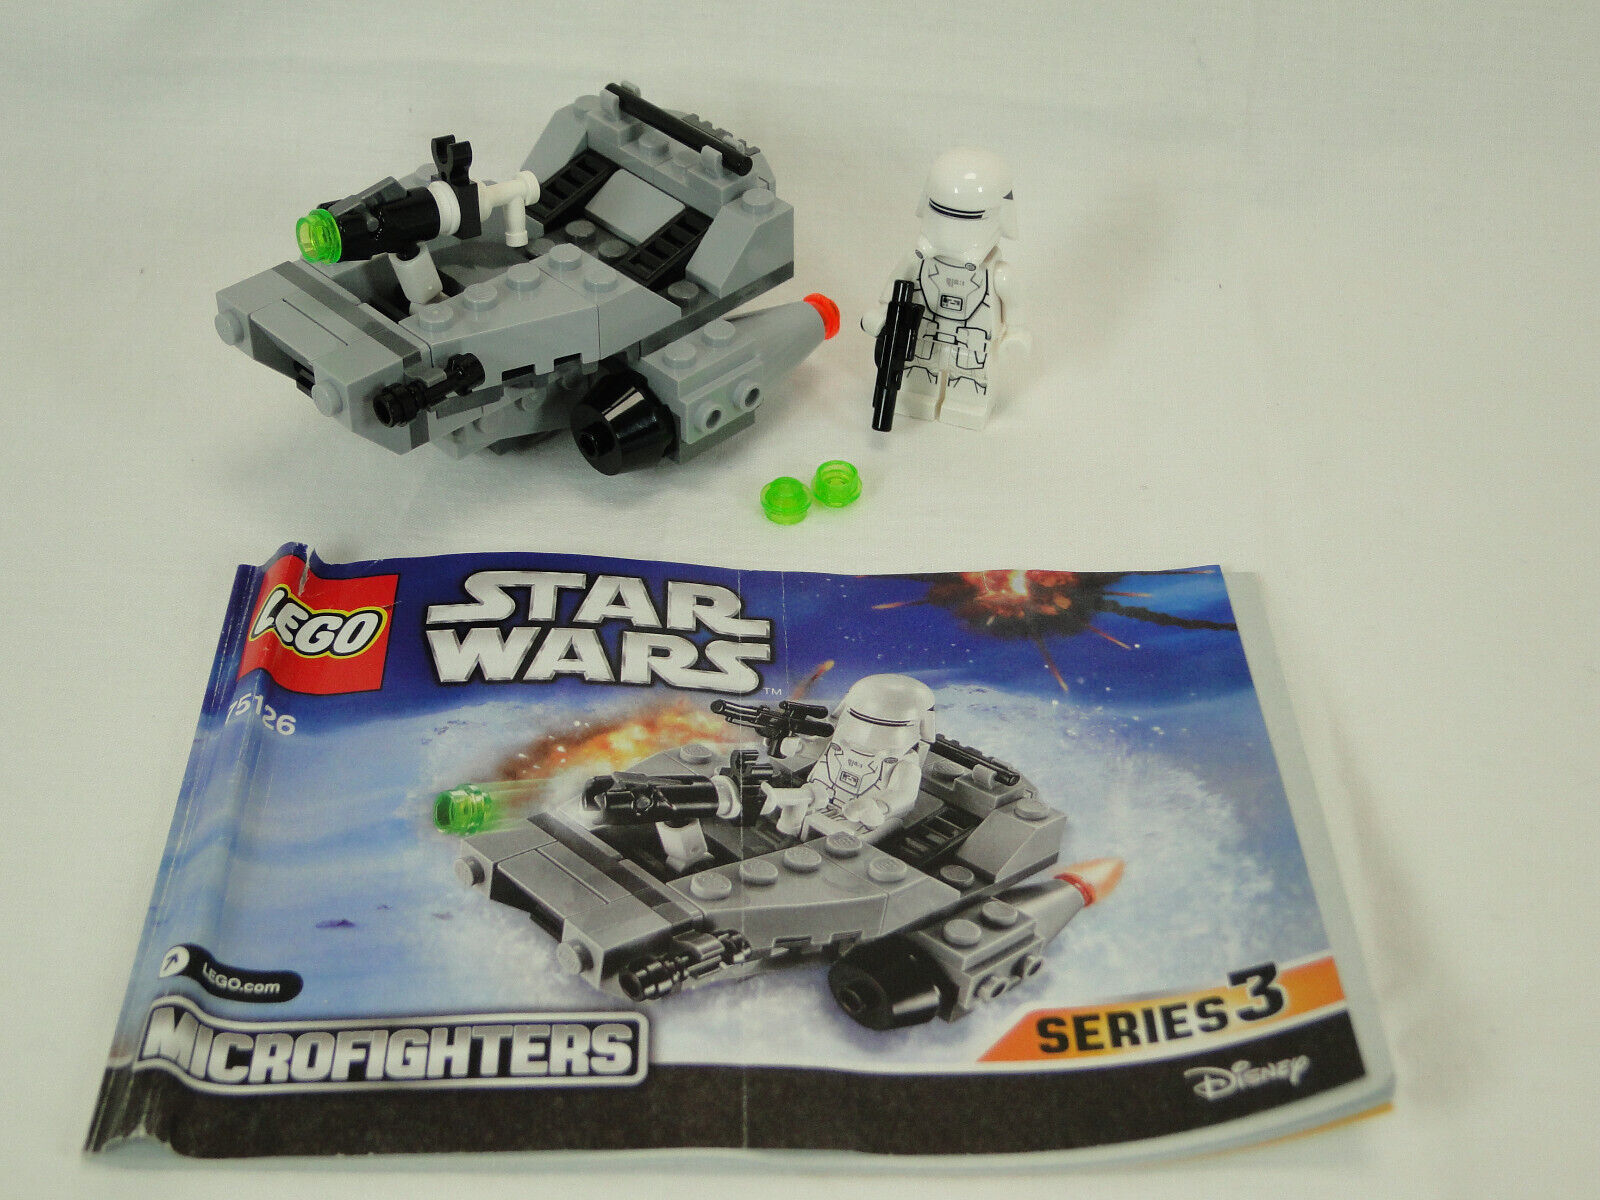 LEGO Star Wars Microfighters 75126 First Order Snowspeeder Complete with OBA